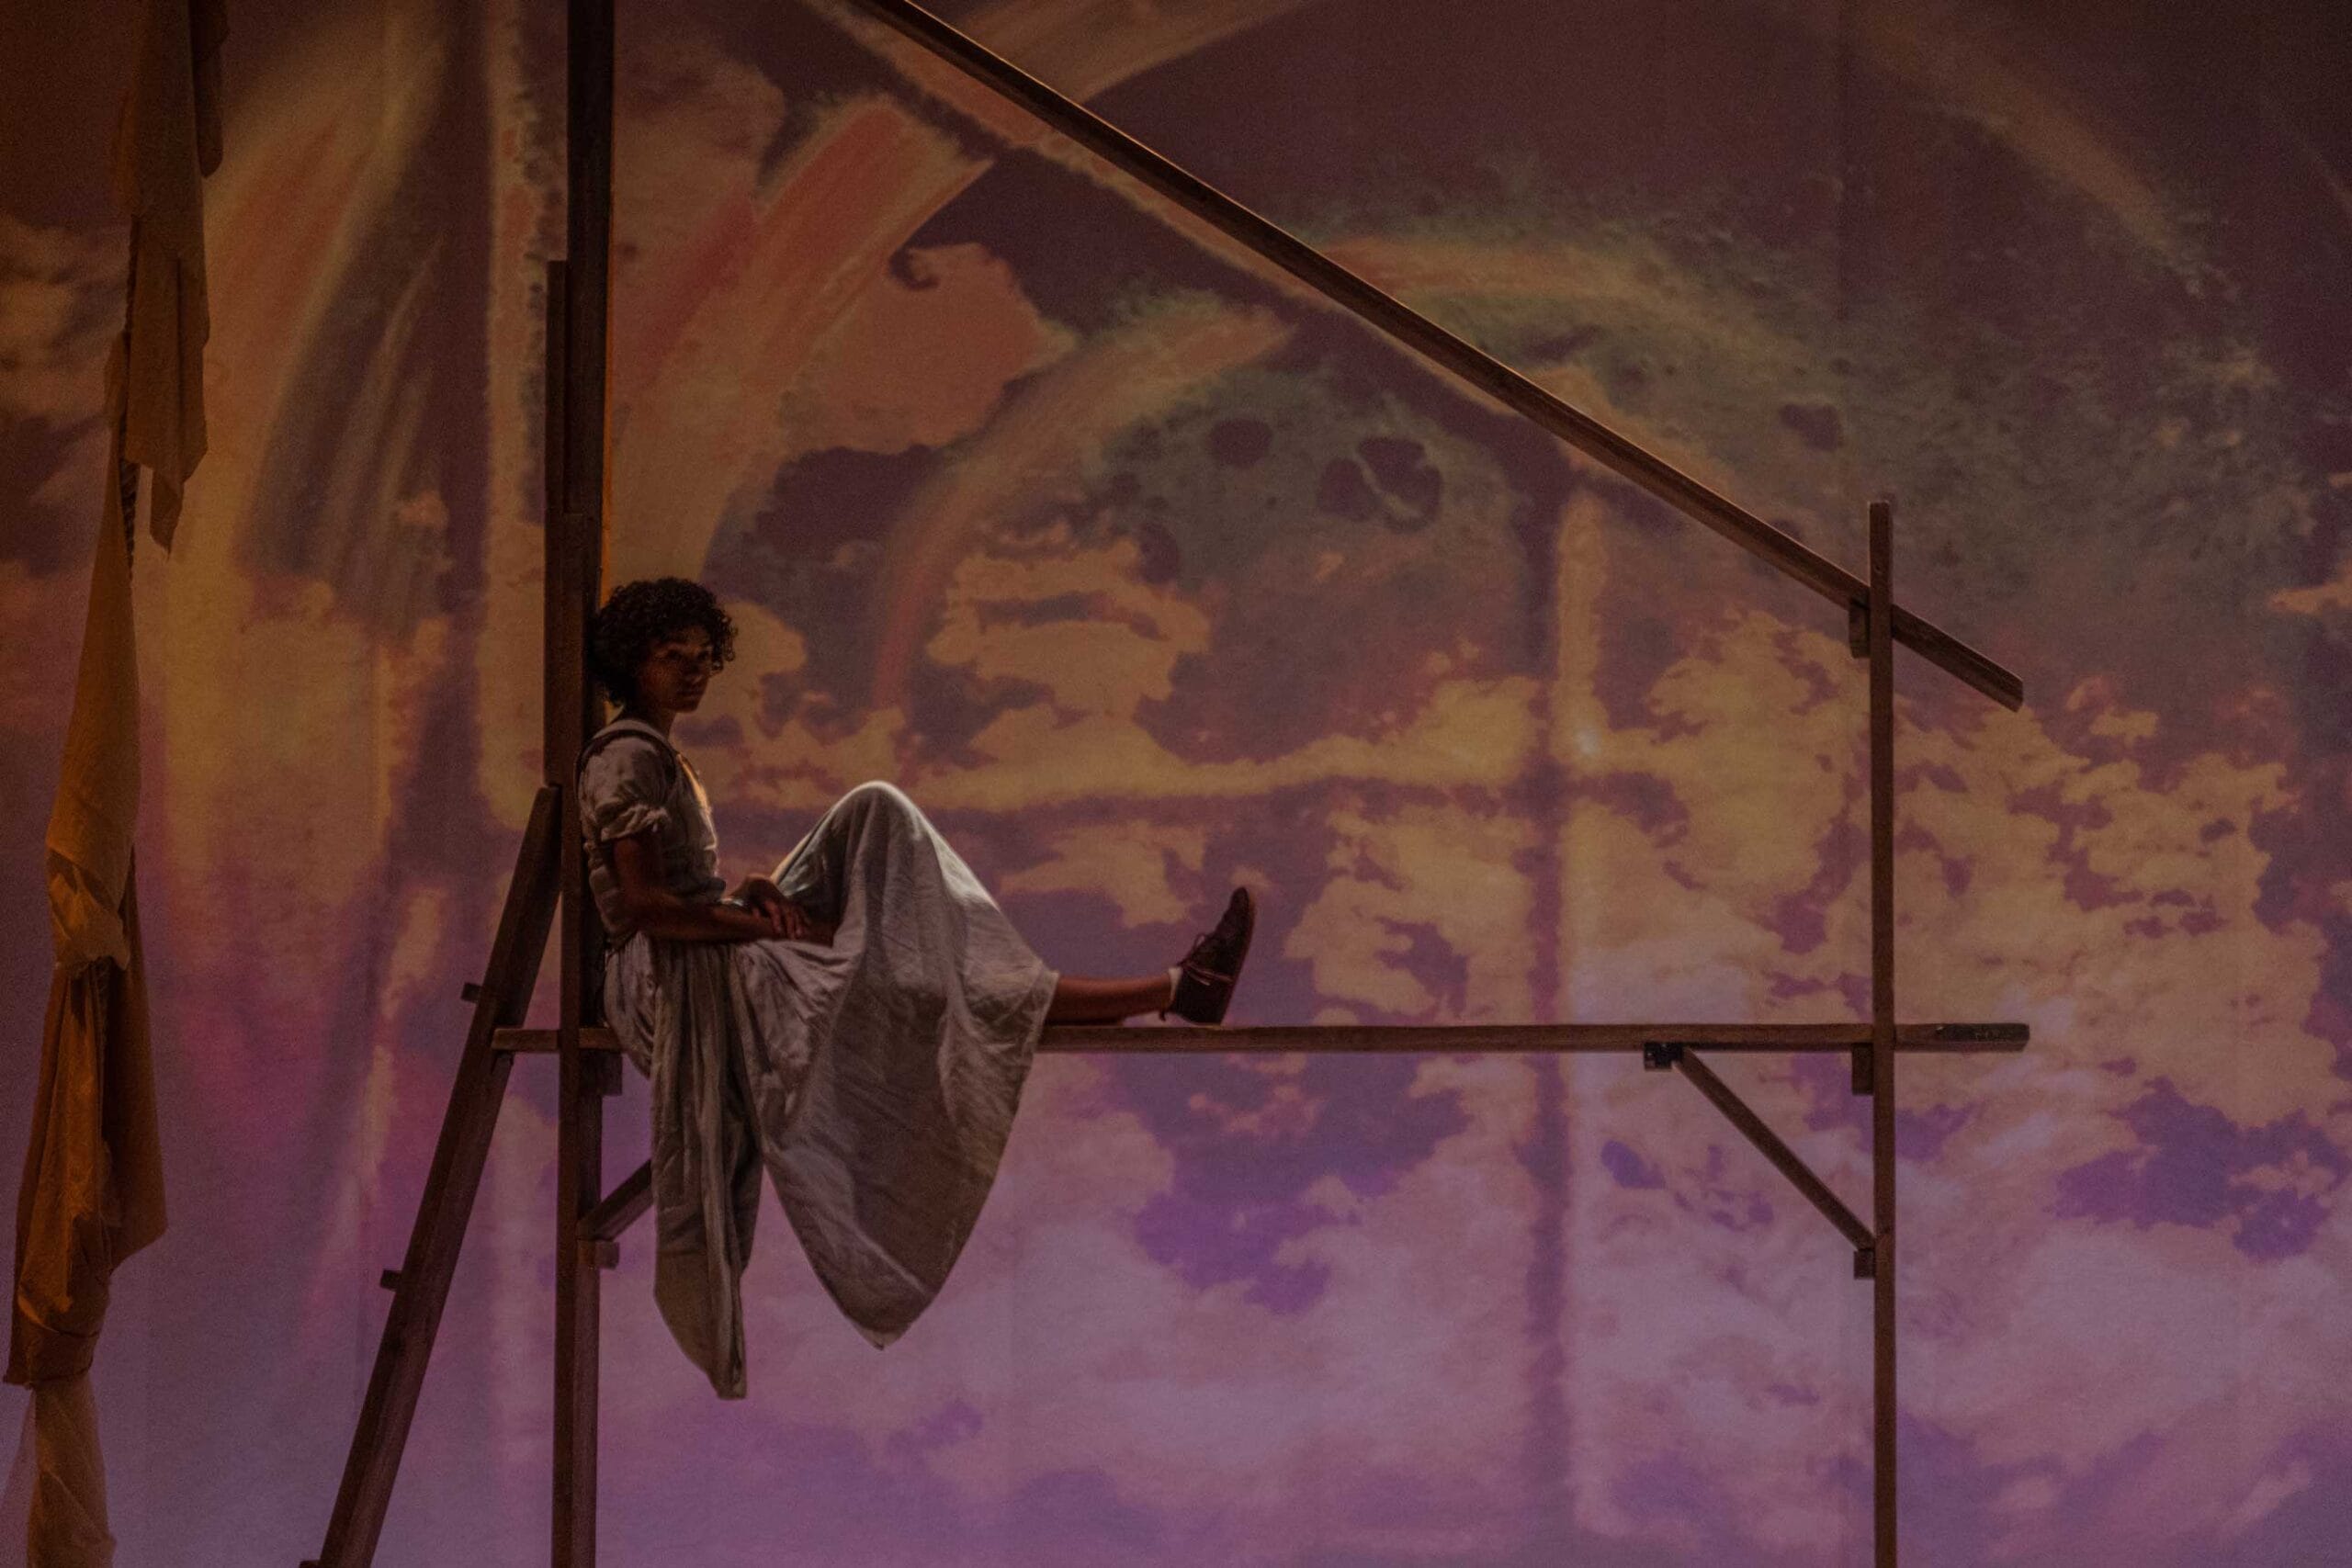 A performer sits high above the group in a thin wooden structure. She is looking into the distance and her flowing skirt hangs below her. Behind her is an abstract projection in muted colours.